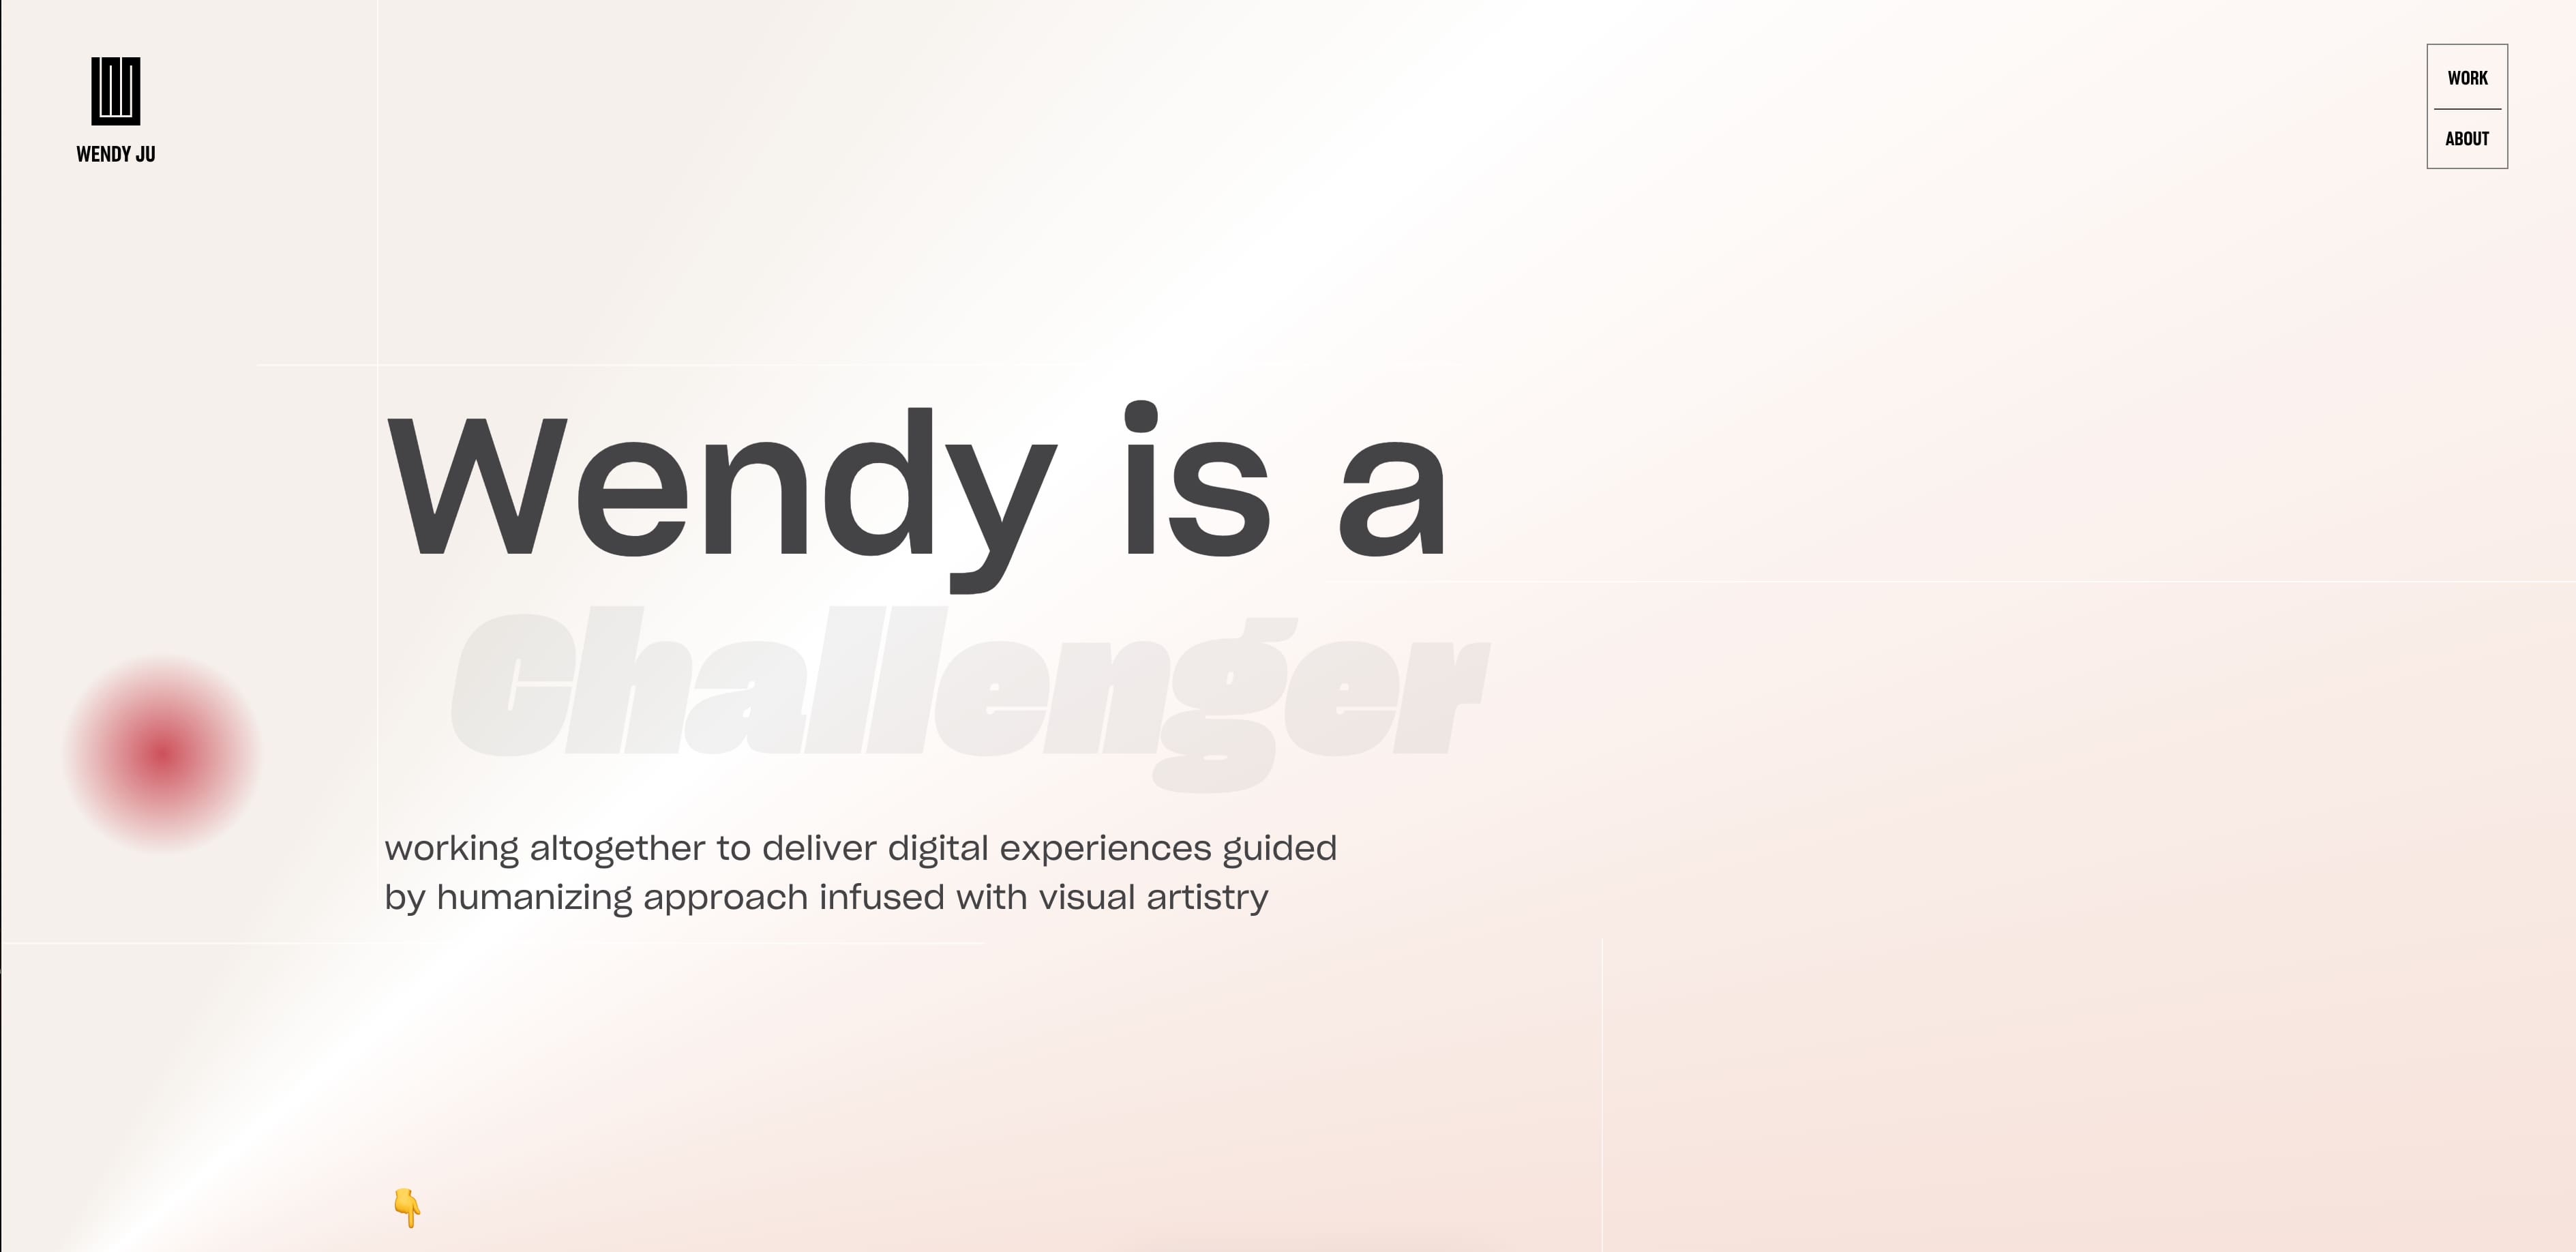 example of a wix website, wendy ju